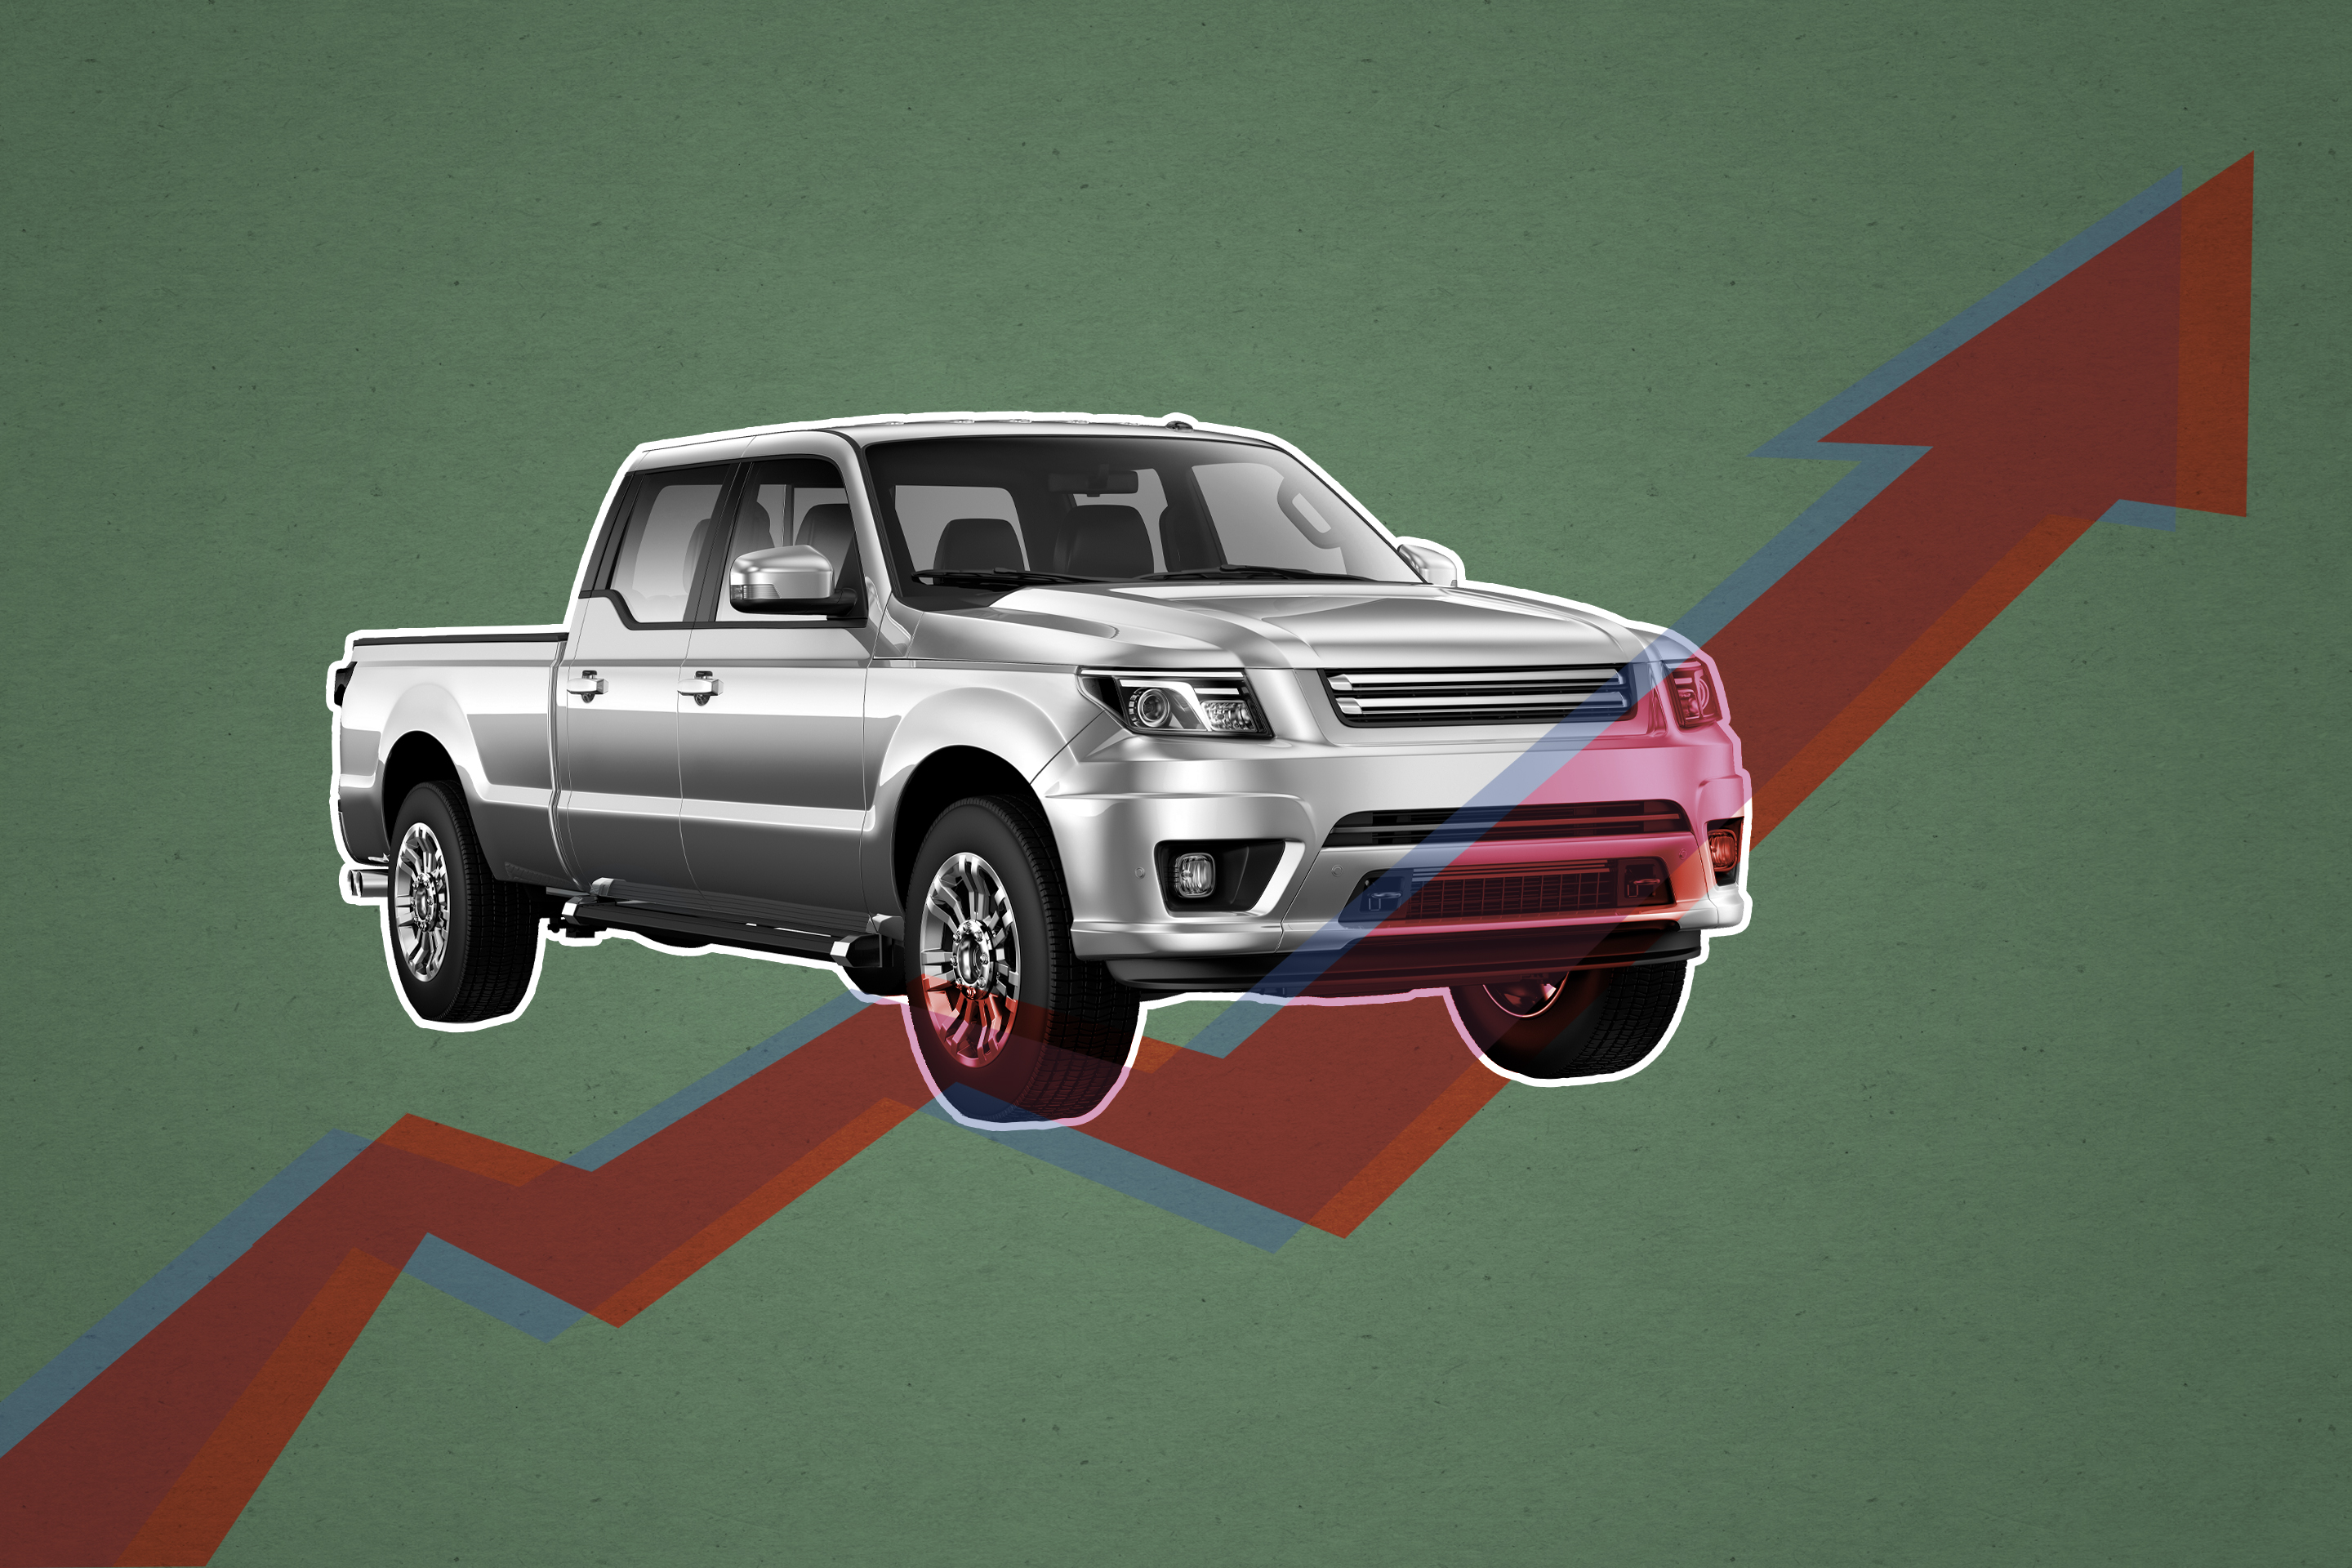 Sticker Shock! A New Car Costs $5,000 More Than a Year Ago, on Average